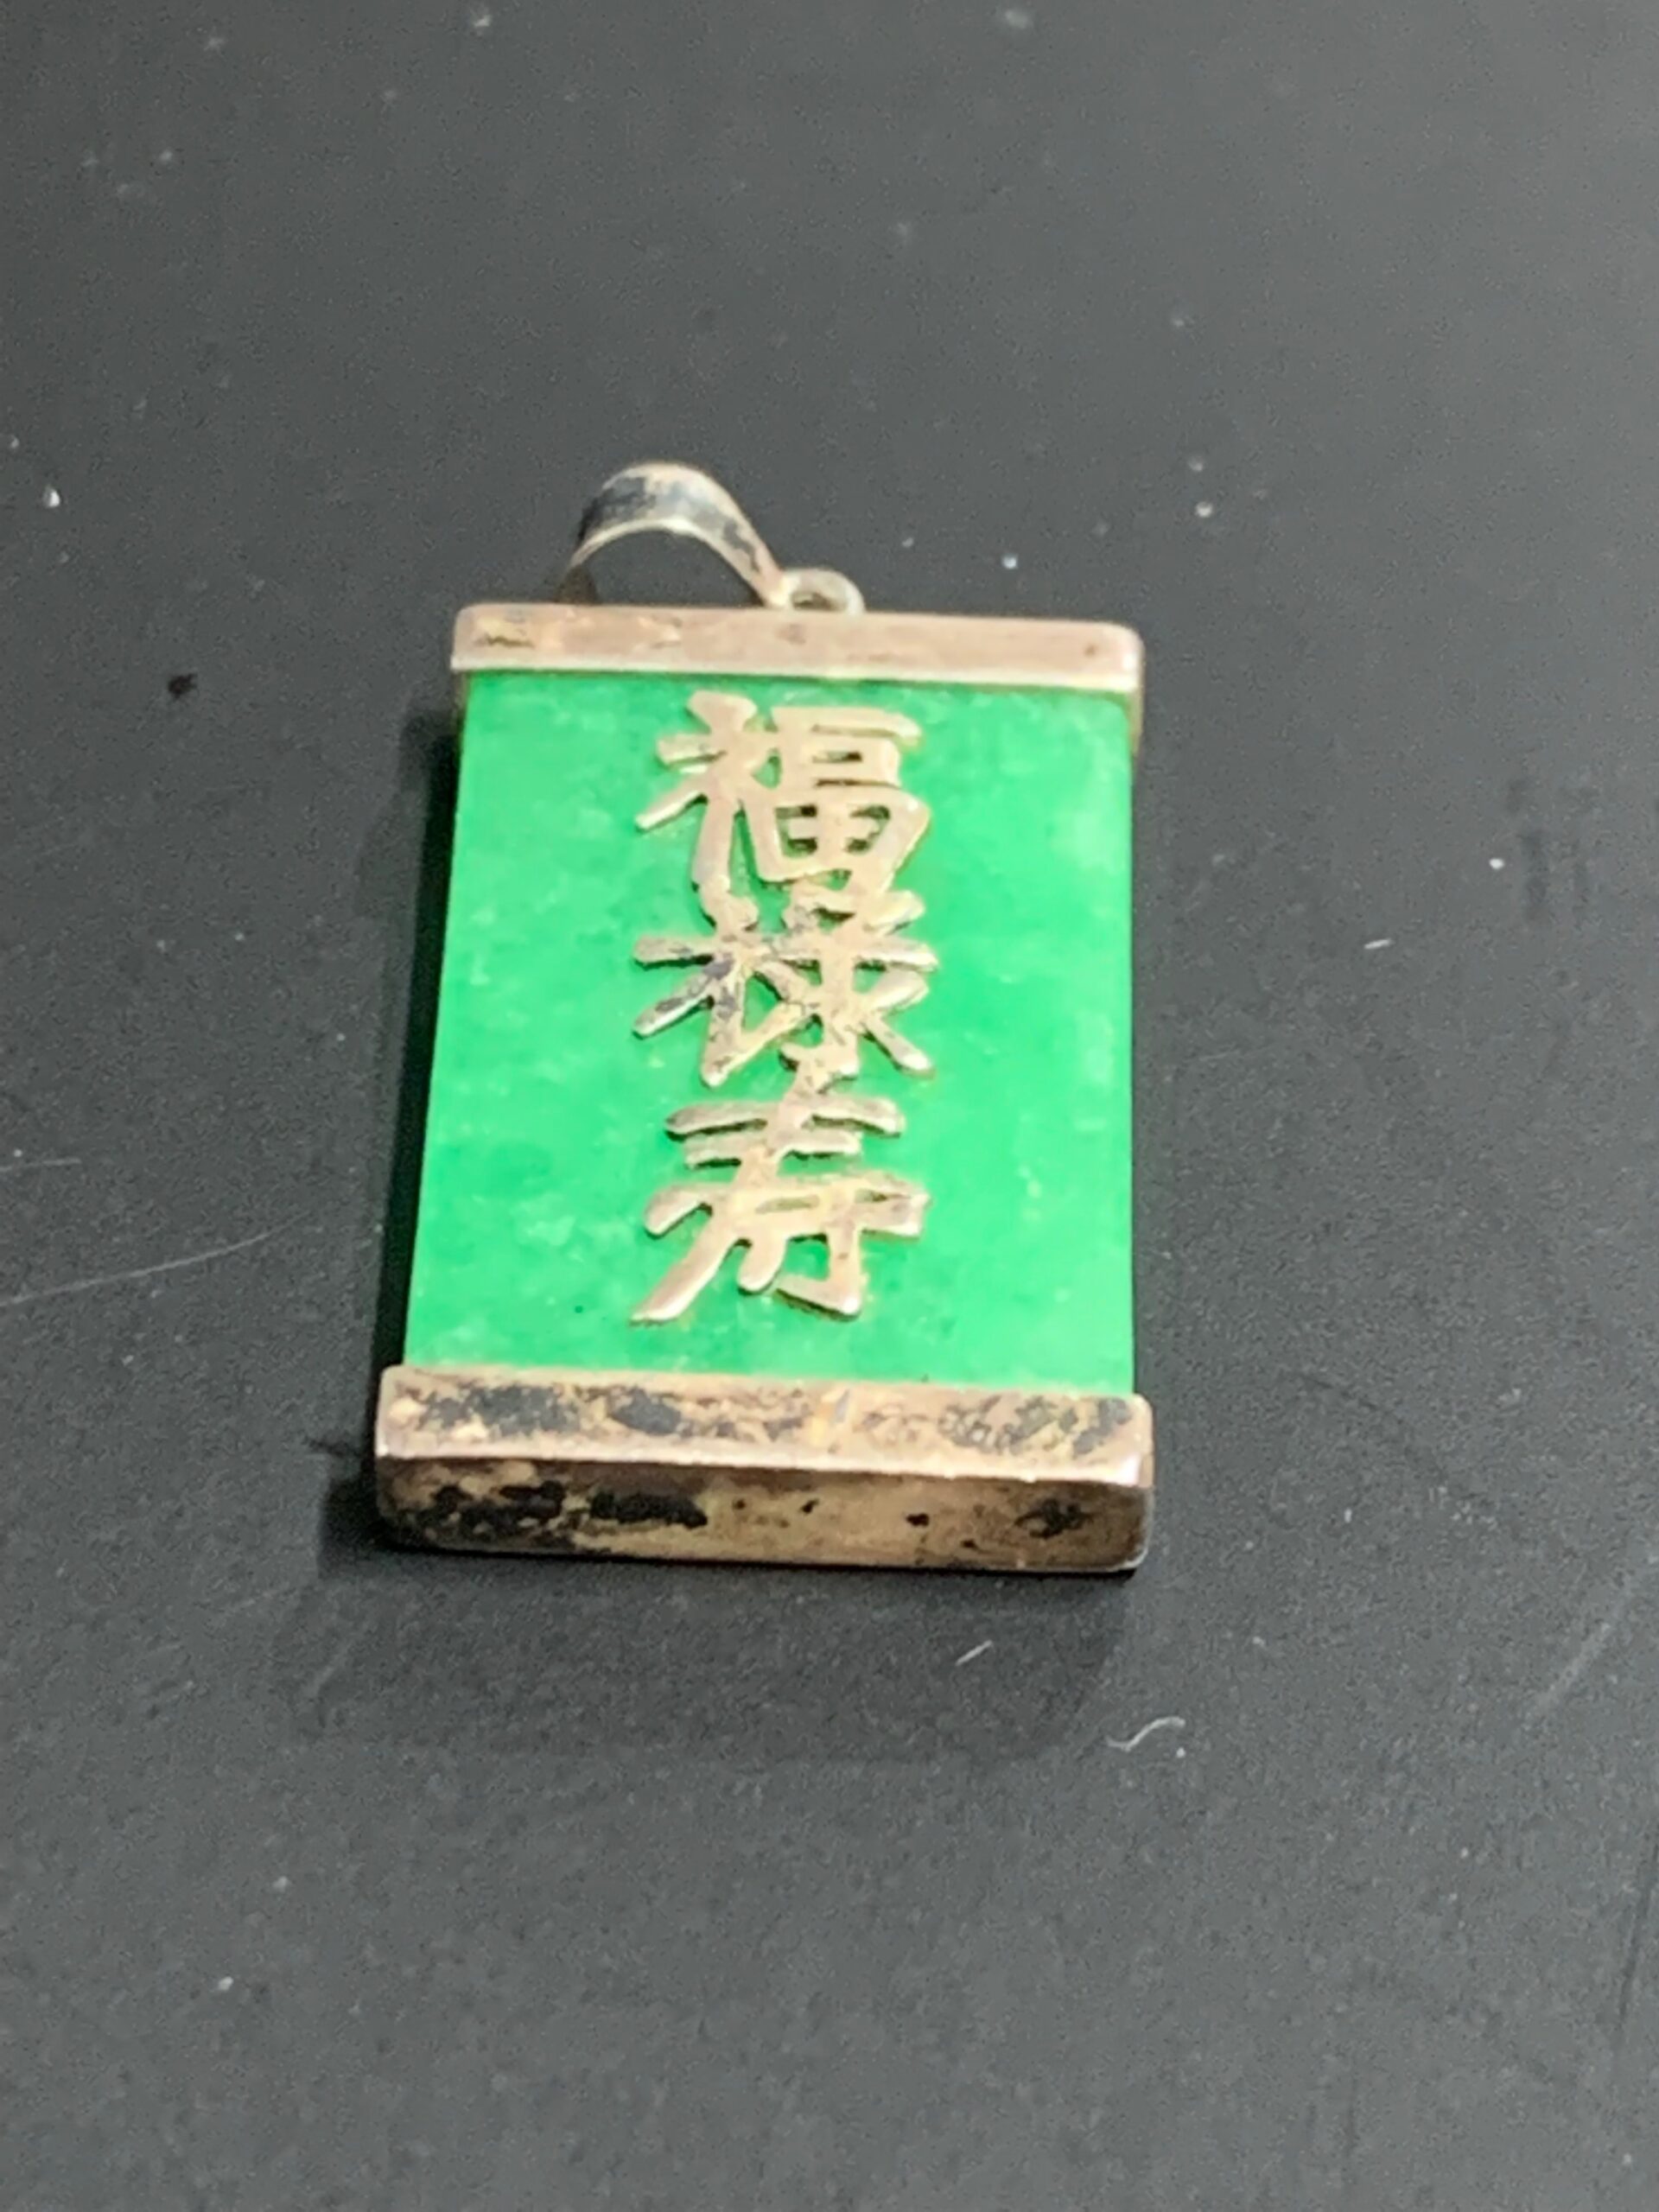 STERLING SILVER AND JADE PENDANT - UNKNOWN TEXT - X Marks The Shop